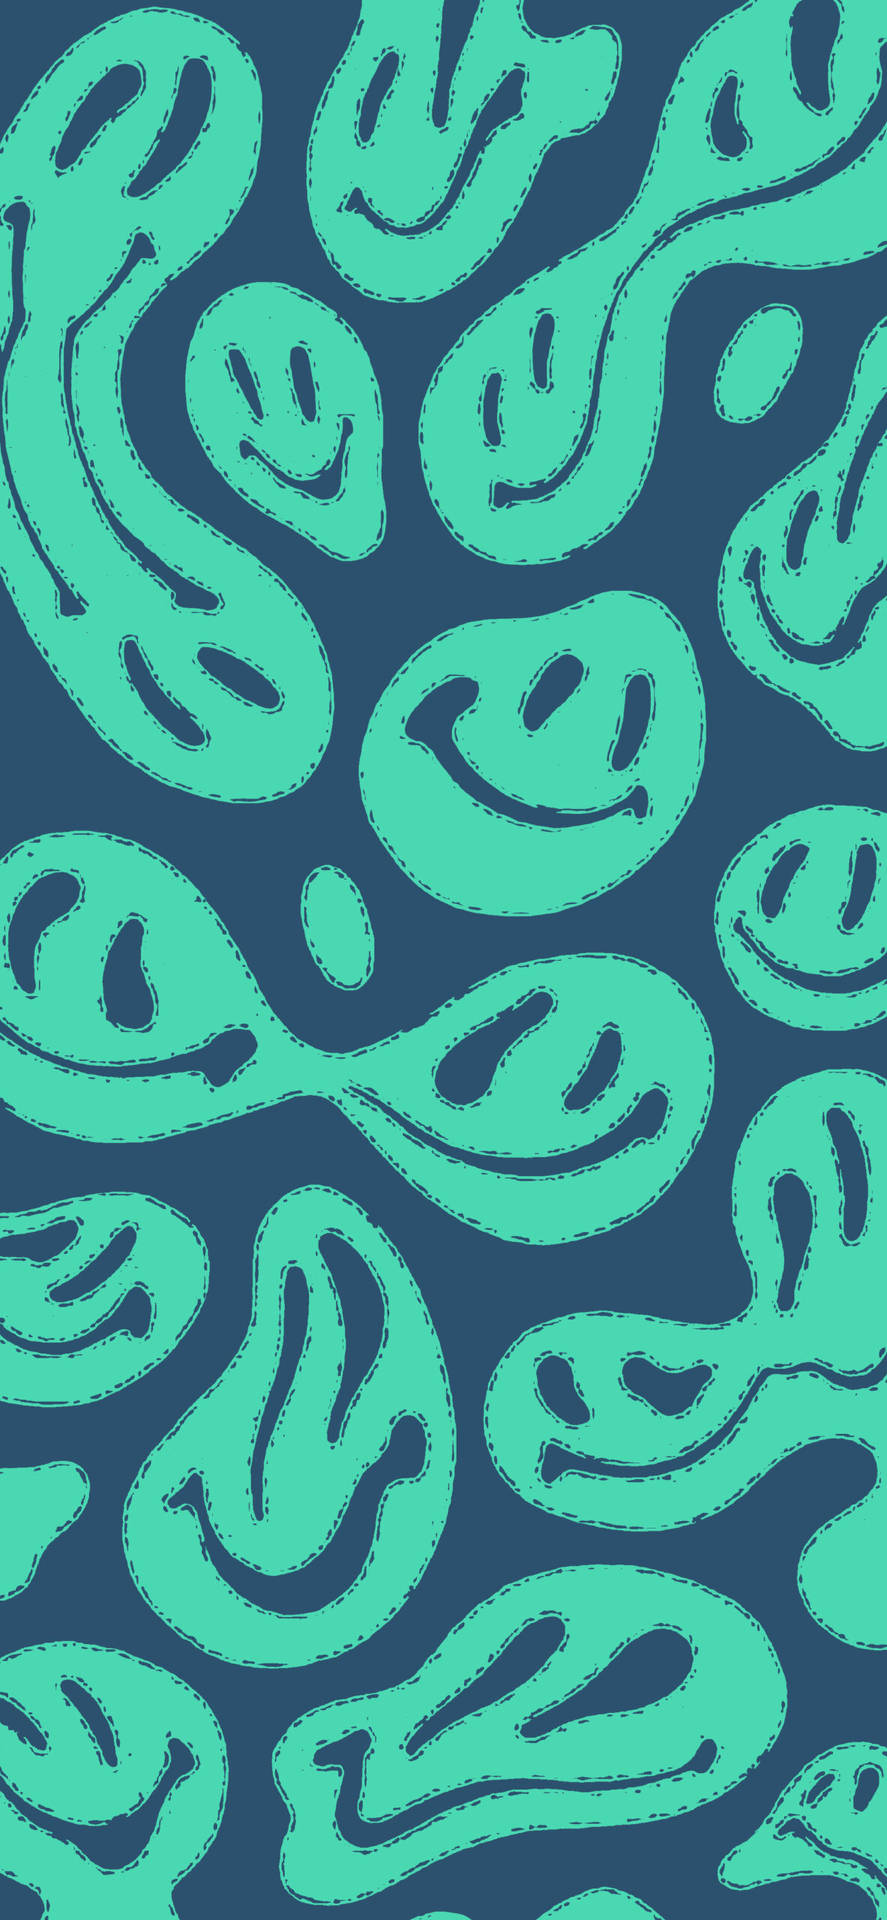 Trippy Aesthetic Blue Distorted Smiley